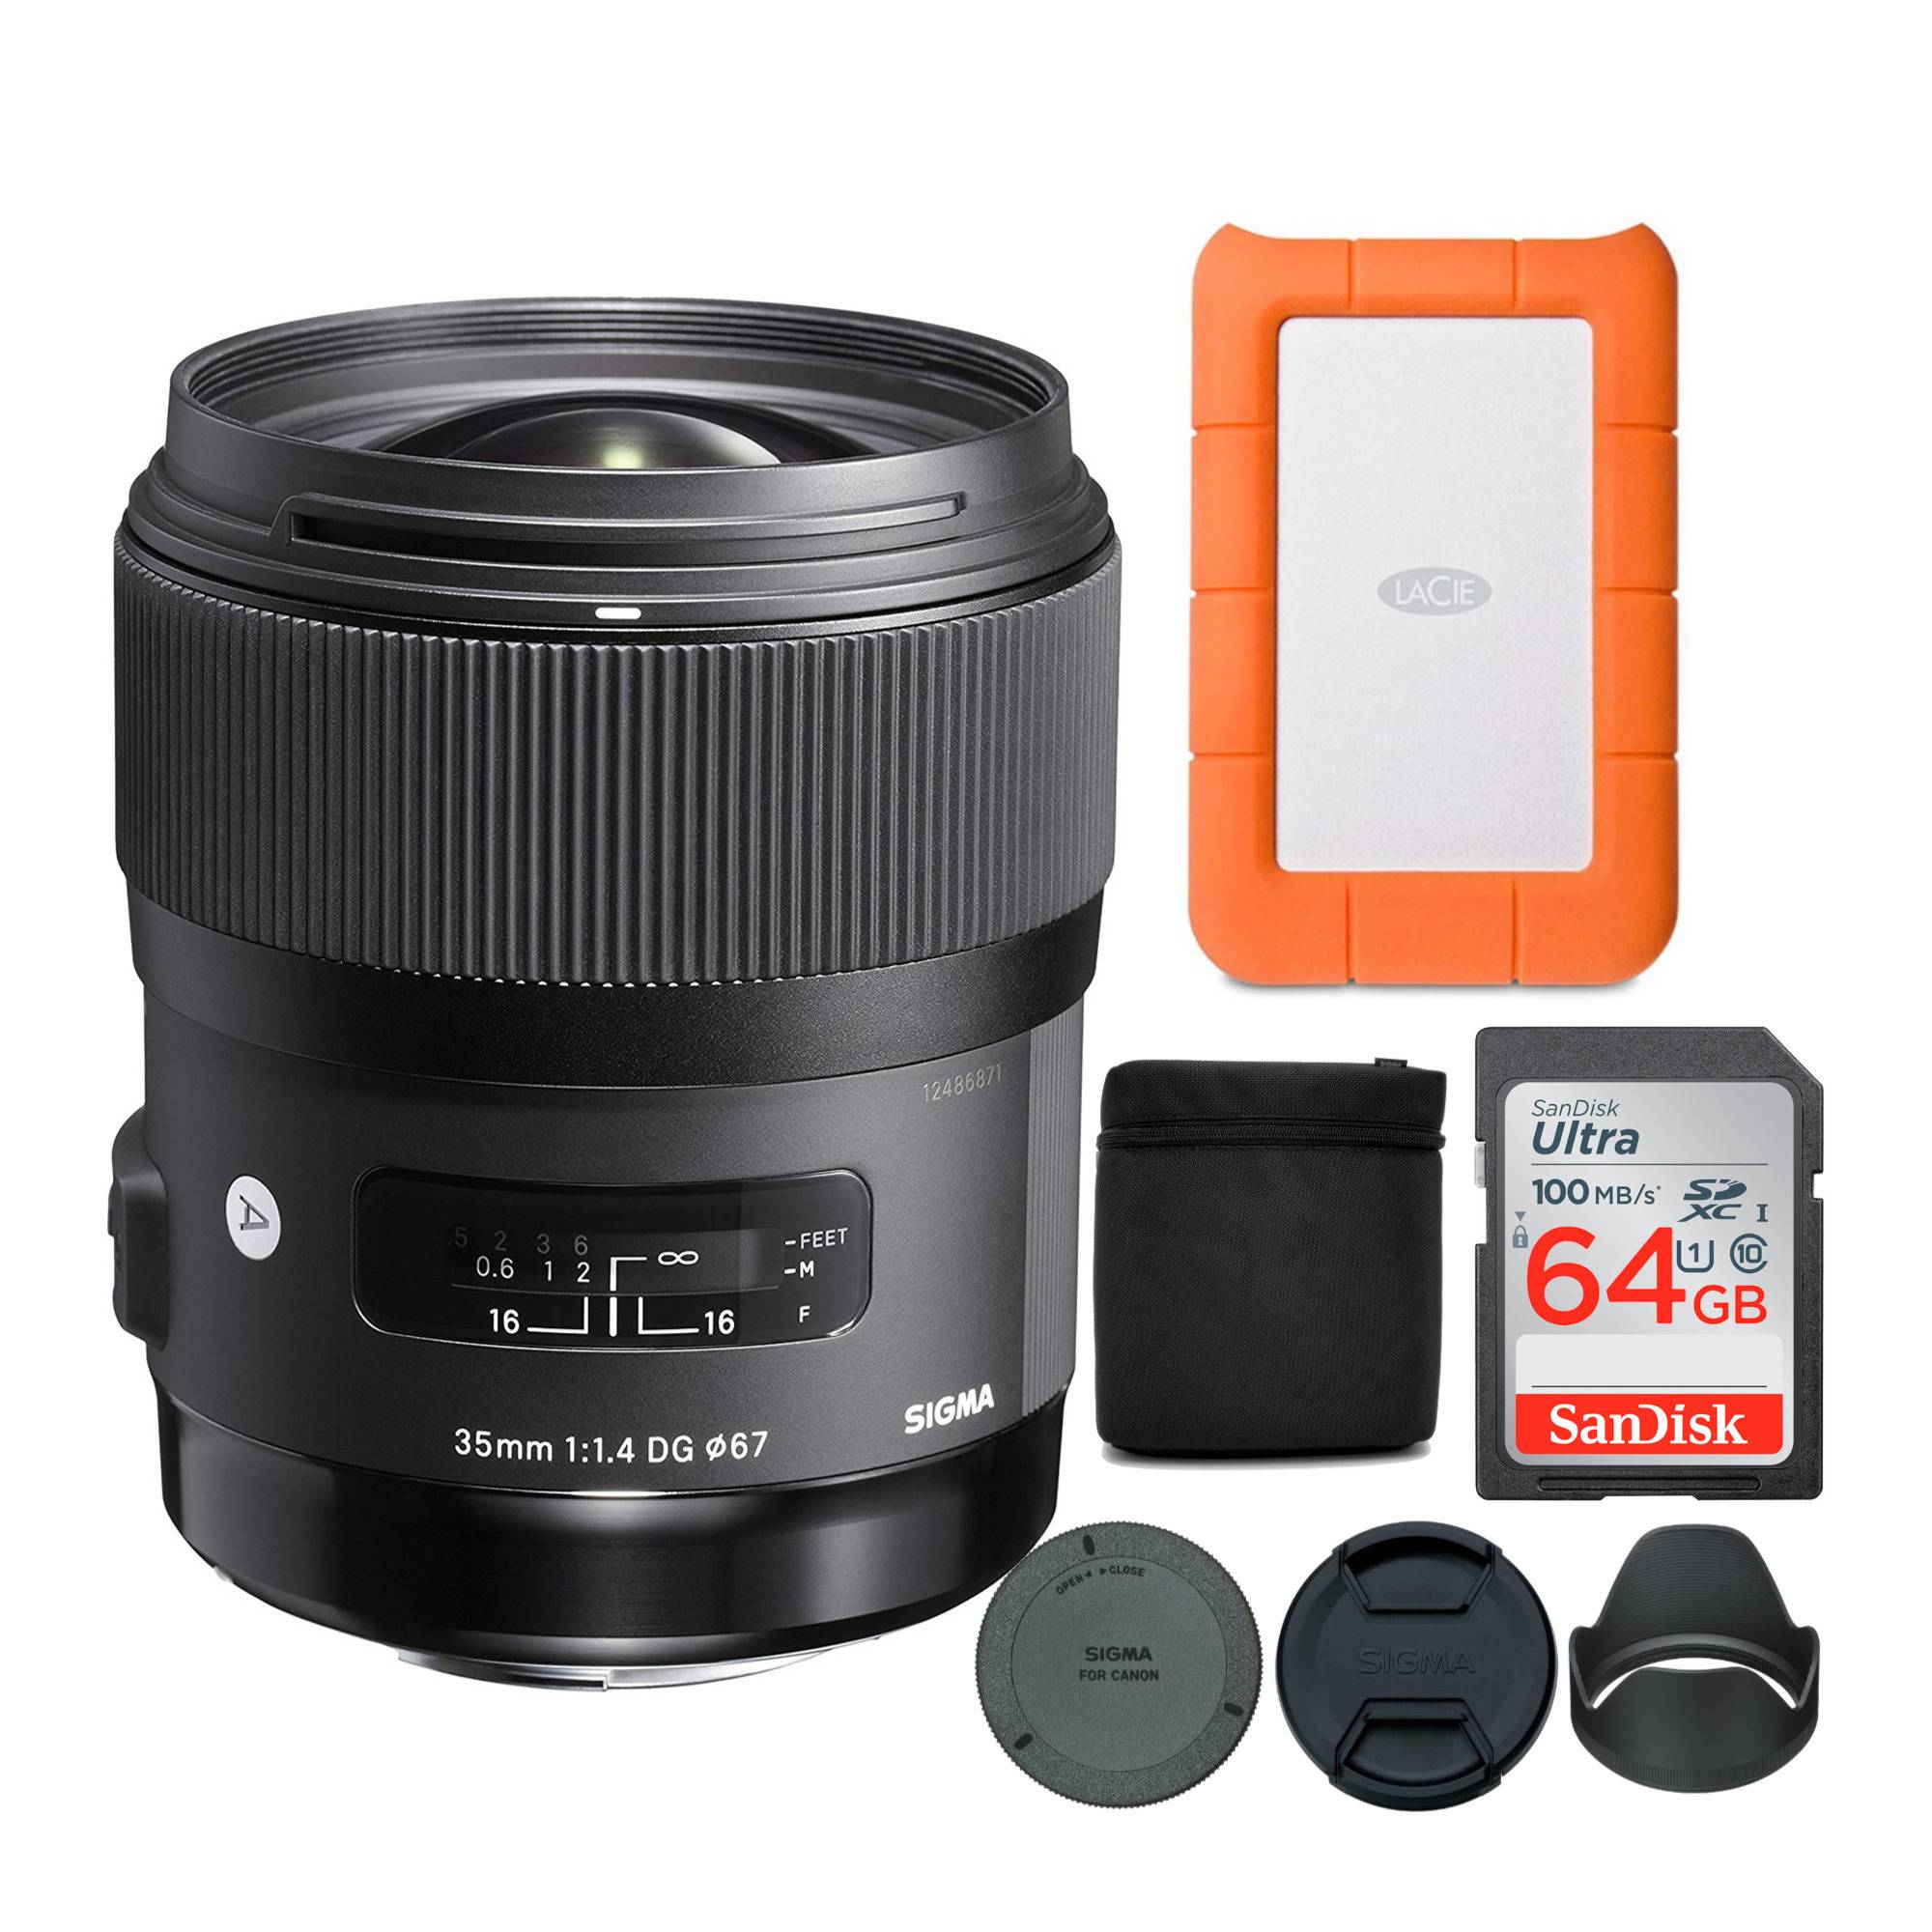 Sigma 35mm f/1.4 Art DG HSM Lens for Canon DSLR Camera with 1TB Hard Drive and 64GB SD Card Bundle